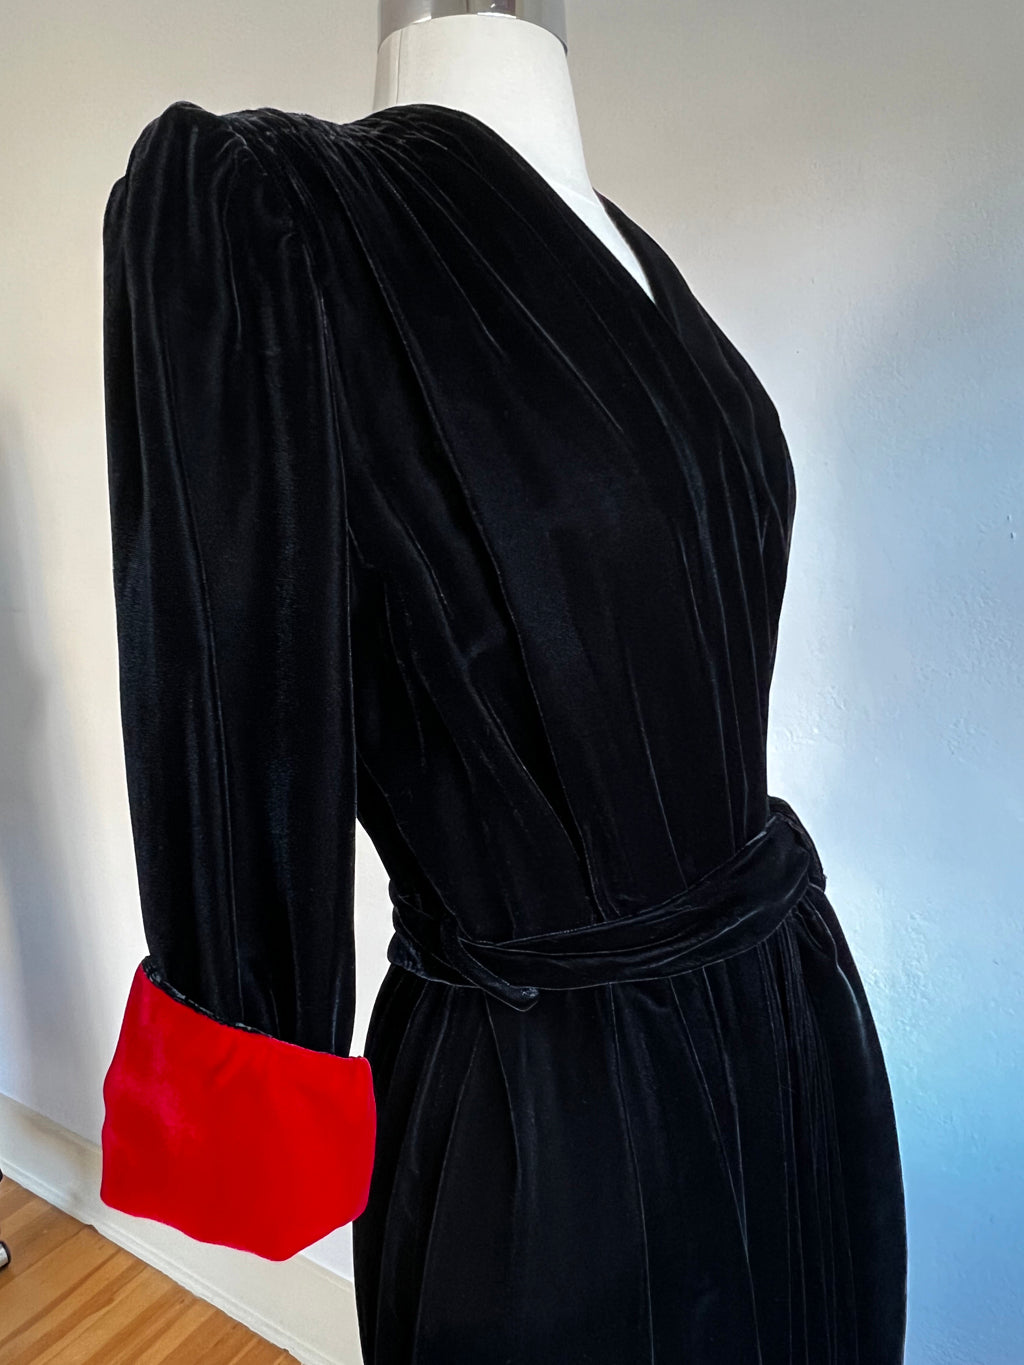 Vintage 1940s Dressing Gown - BLACK WIDOW Rayon Jersey Colorblock Strong Shoulder Wrap Robe w Blood Red Cuffs Fits Many